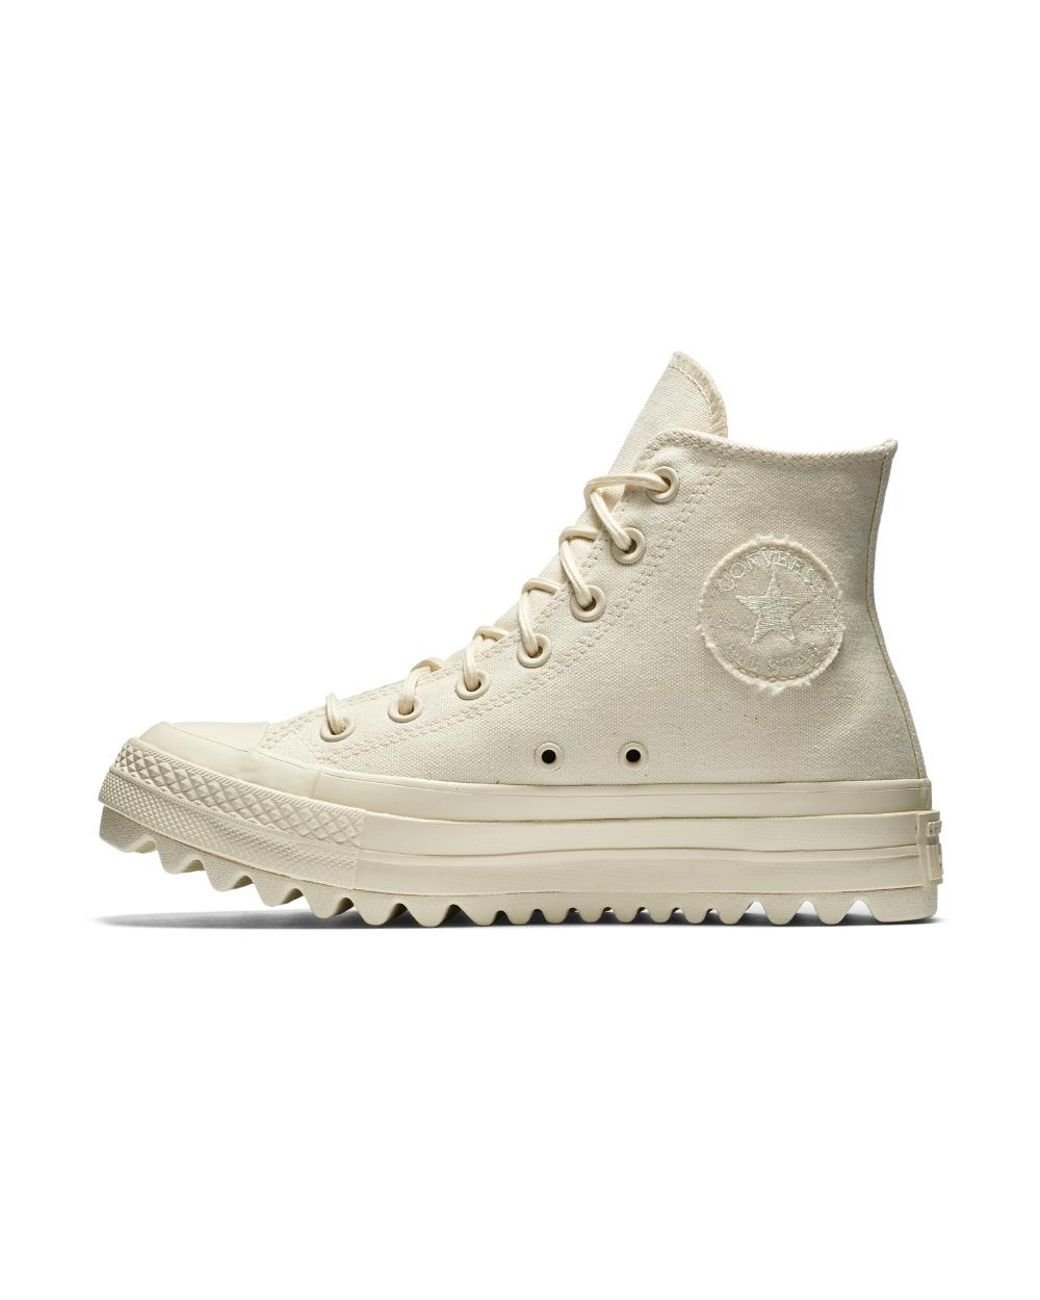 Converse Chuck Taylor All Star Lift Ripple Canvas High Top Women's Shoe in Natural Lyst